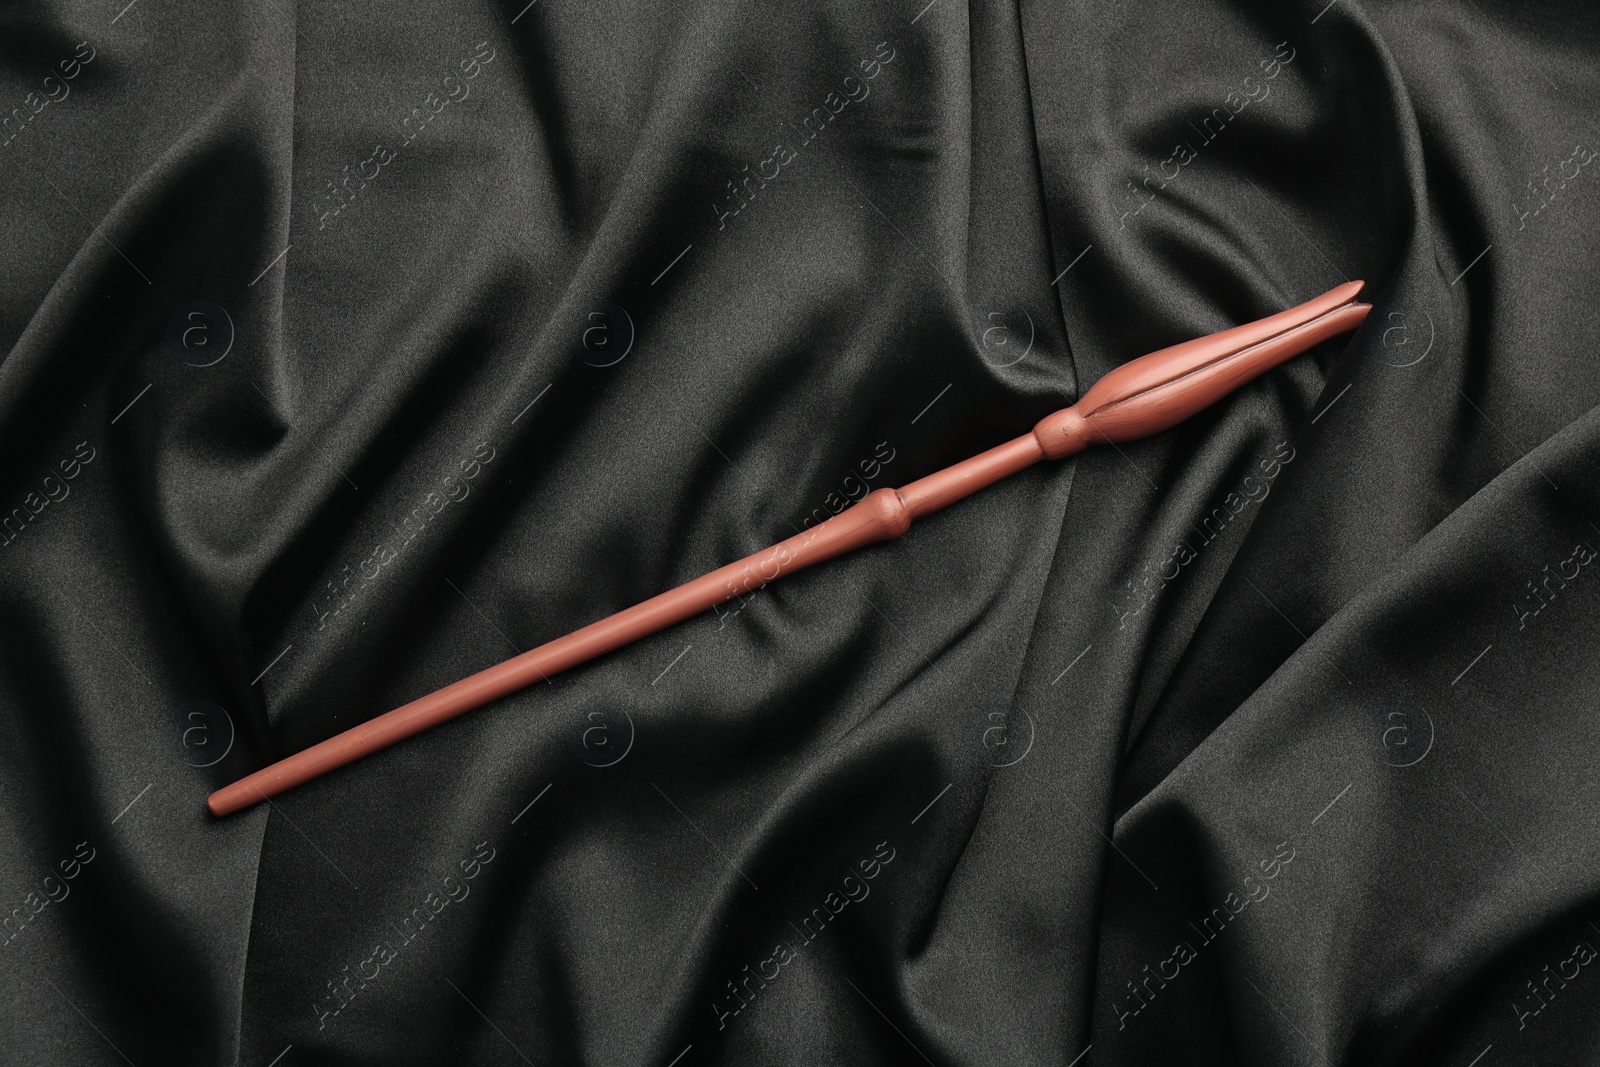 Photo of One magic wand on black fabric, top view